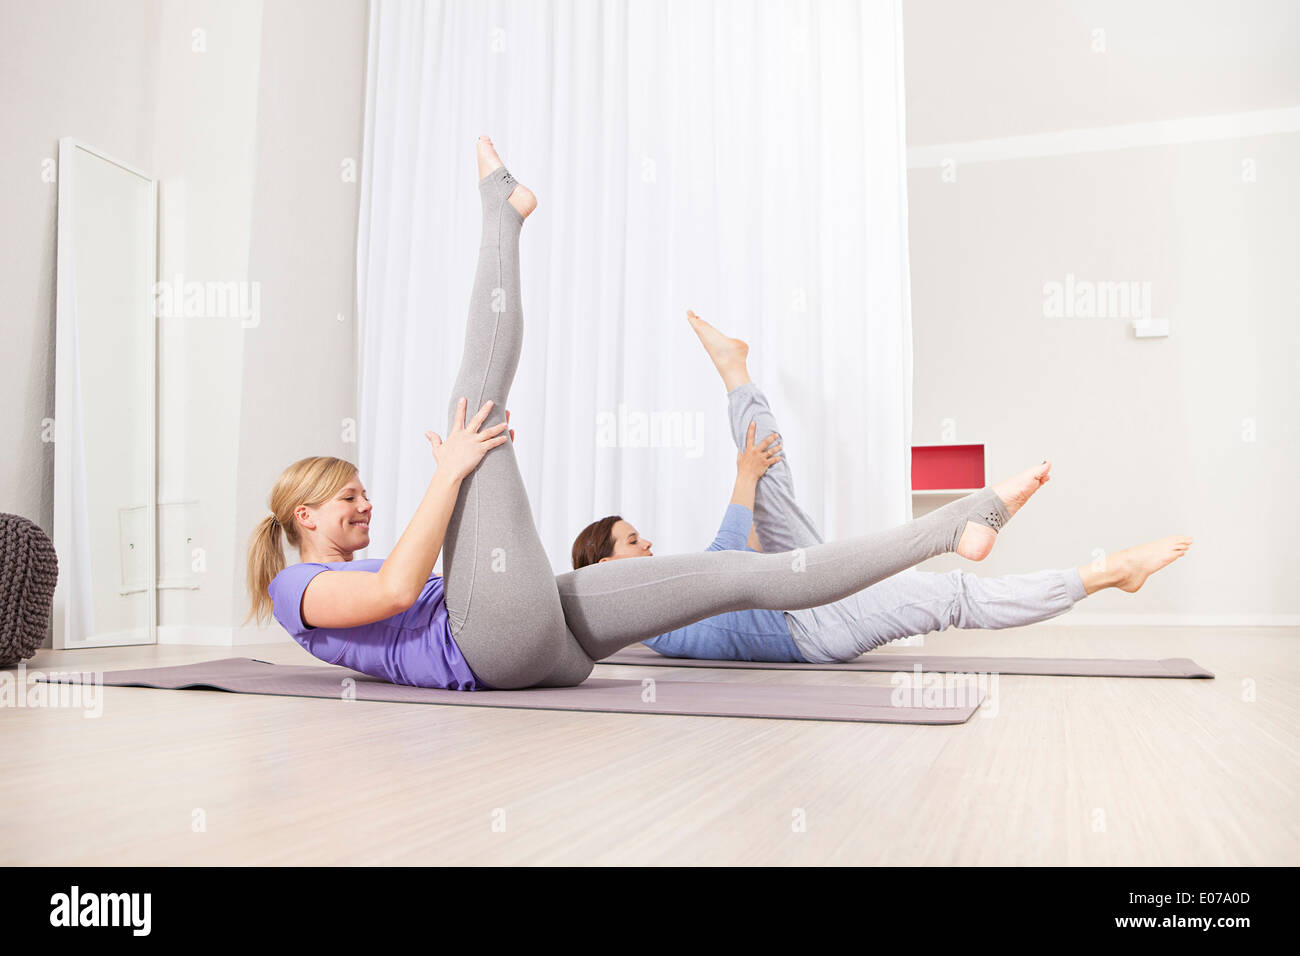 Women doing Pilates exercise, stretching out legs Stock Photo